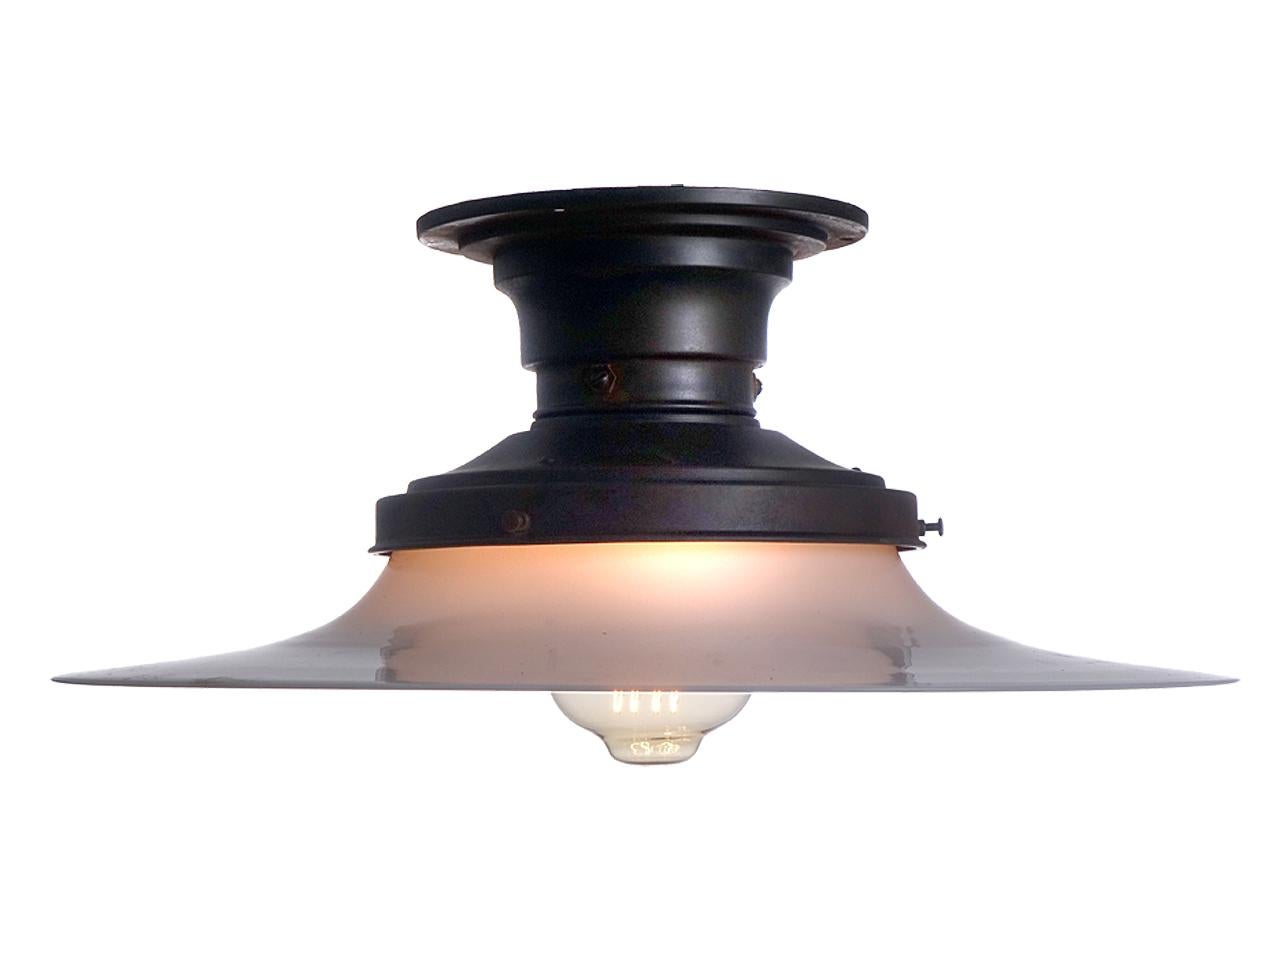 We do have a pair of these in stock but have priced them per lamp. This way you can buy just one or both. These lamps are my favourite early flush mount fixtures. In fact I have a set just like this lighting my hallway at home. The lamp is very